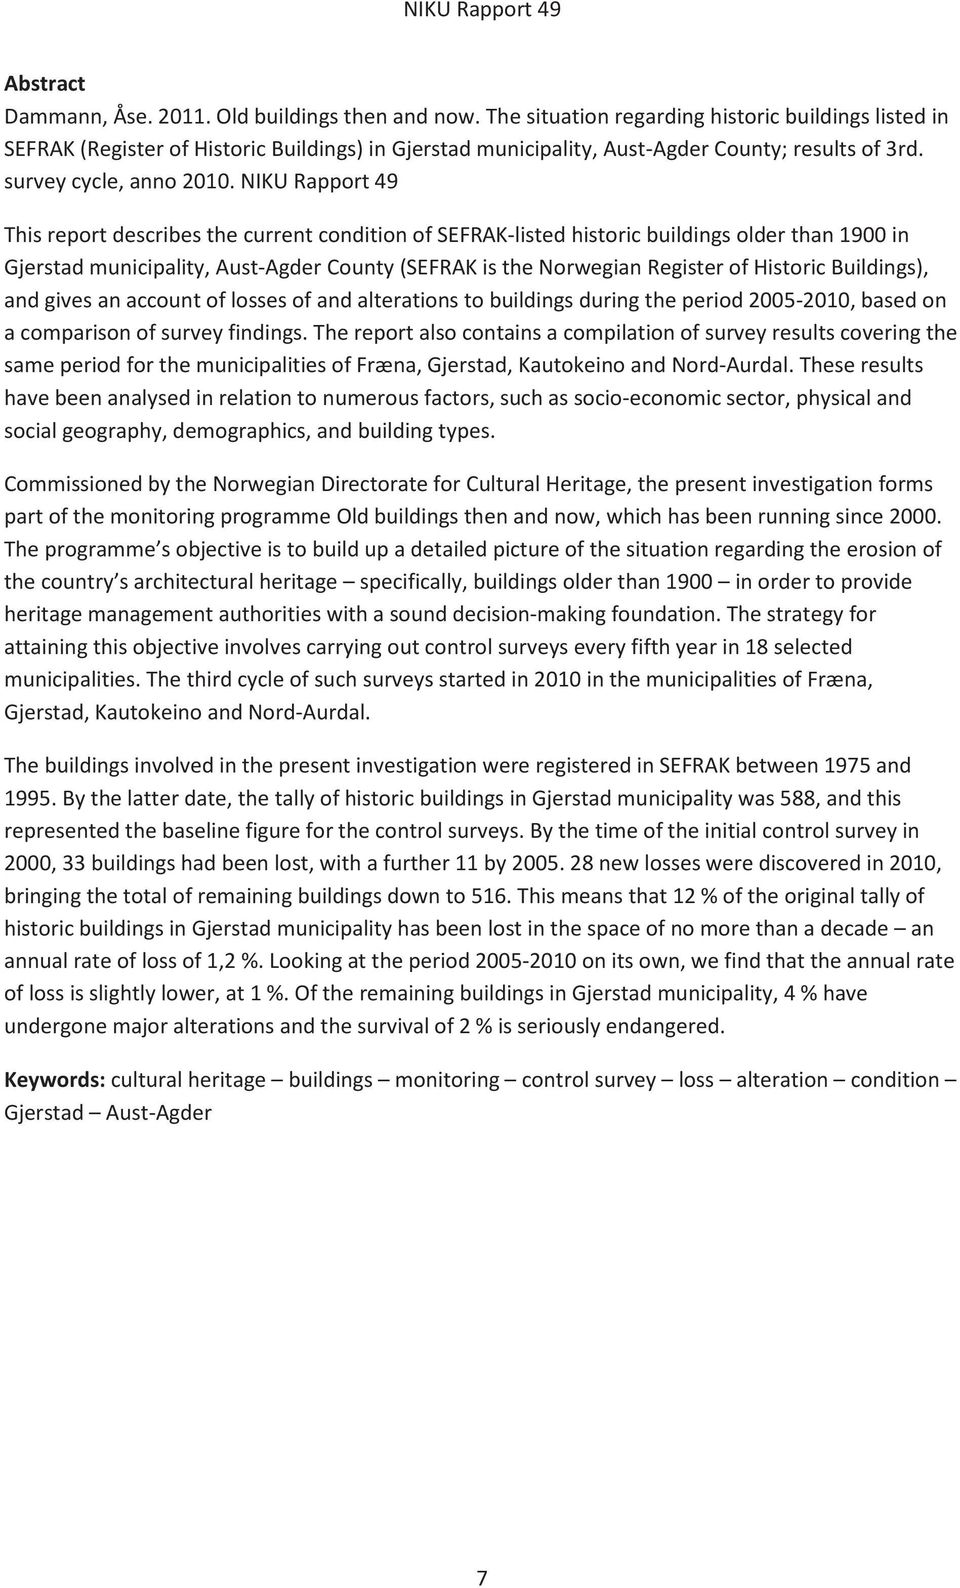 NIKU Rapport 49 This report describes the current condition of SEFRAK-listed historic buildings older than 1900 in Gjerstad municipality, Aust-Agder County (SEFRAK is the Norwegian Register of